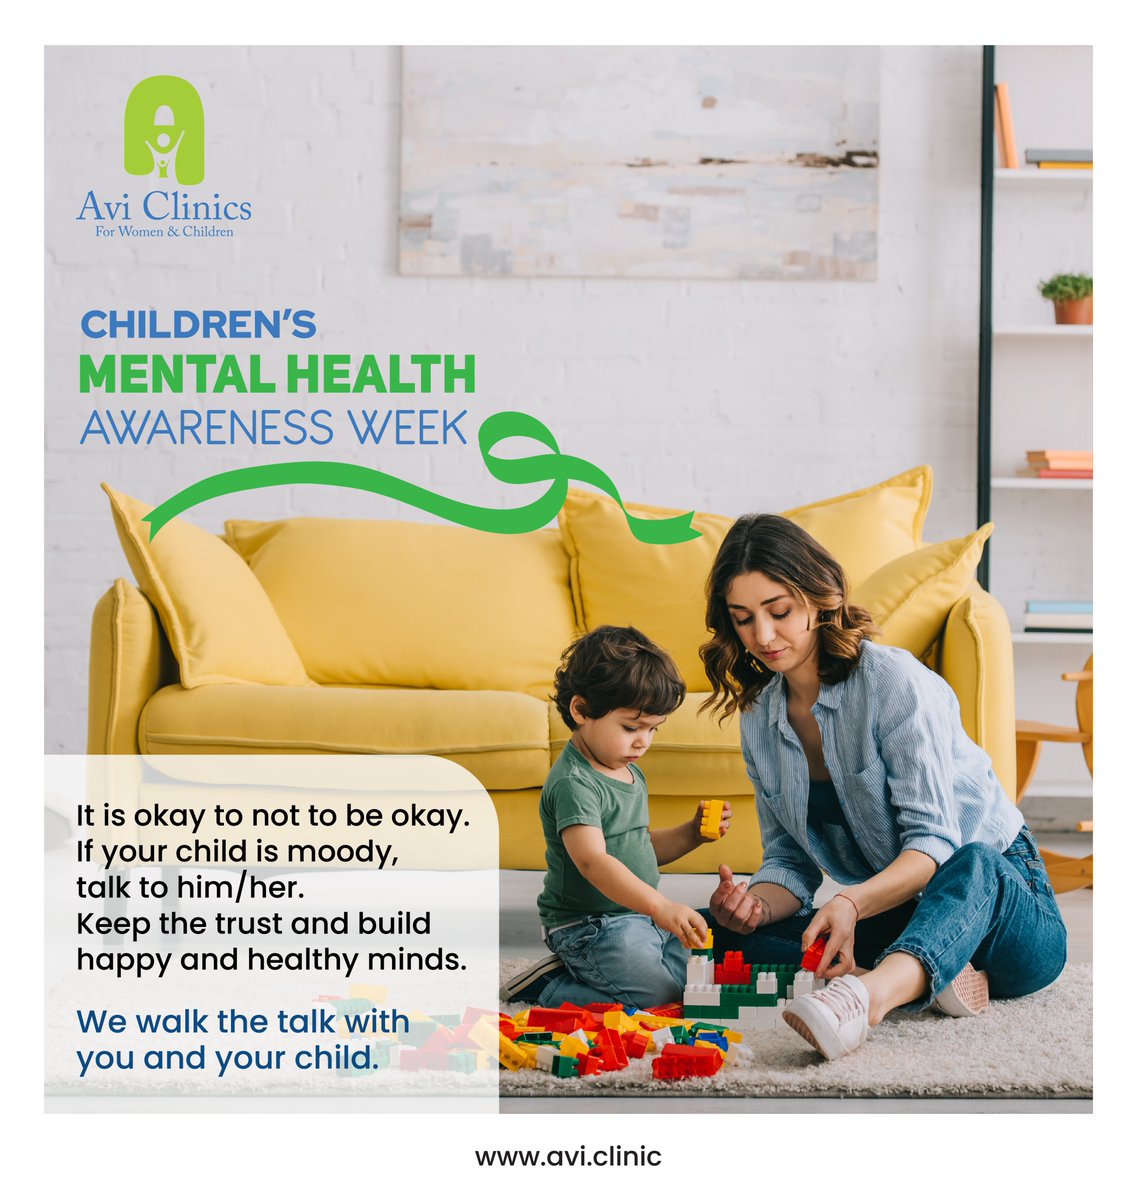 Children’s Mental Health Awareness Week!
It is okay to not to be okay. If your child is moody, talk to him/her. 
Keep the trust and build happy and healthy minds. 
We walk the talk with you and your child.

#Health #ChildrensHealth #ChildrensMentalHealth #MentalHealthAwareness